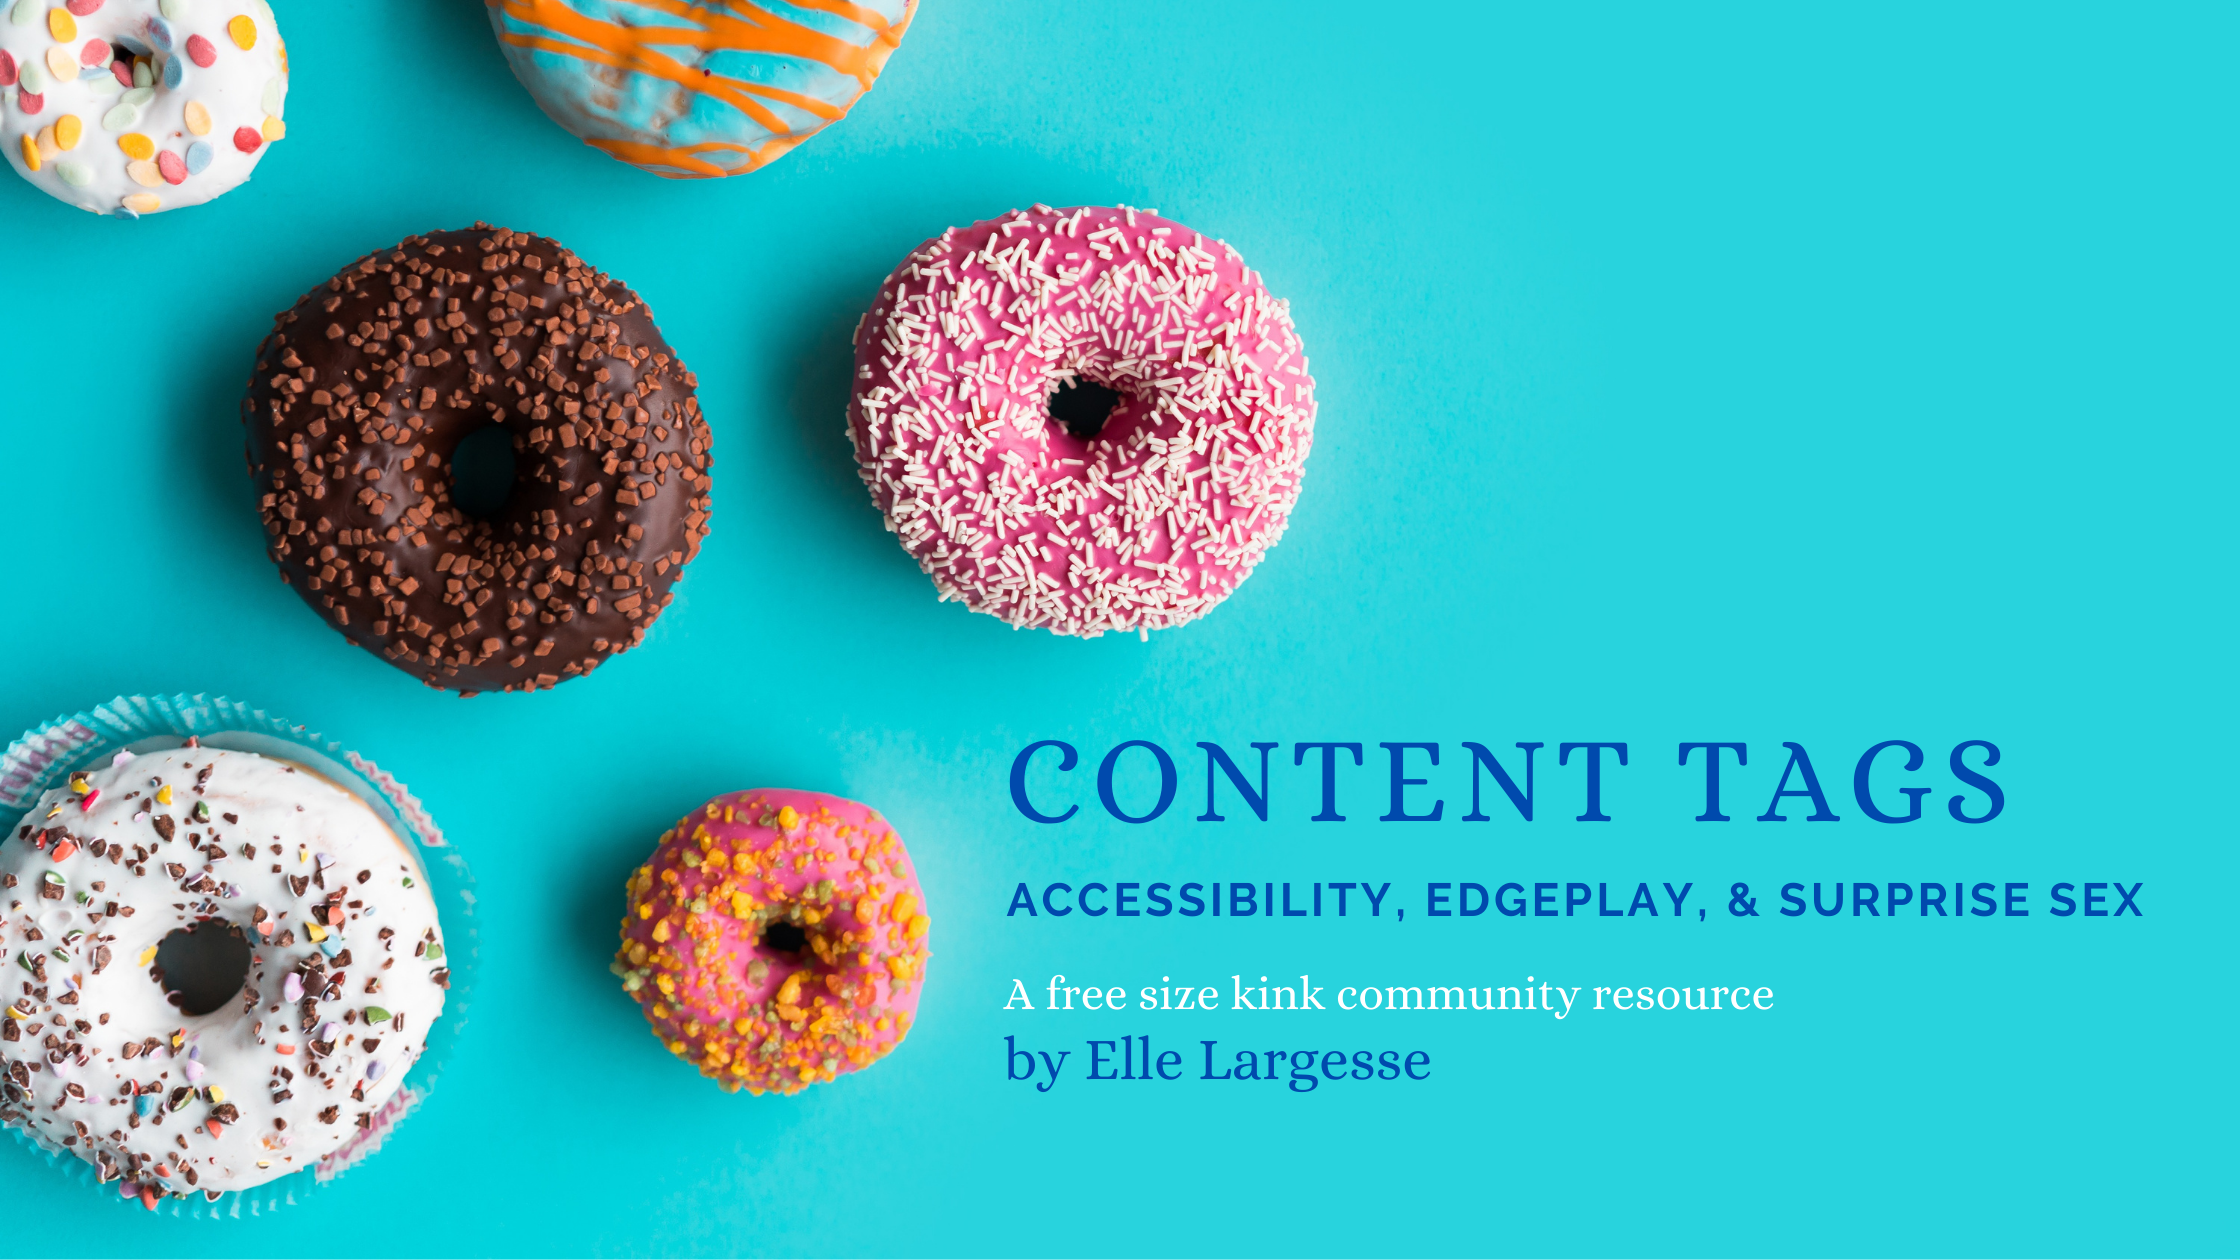 Six very different donuts on a teal background. Text reads "Content Tags, Accessibility, Edgeplay, and Surprise Sex, a free size kink community resource by Elle Largesse."